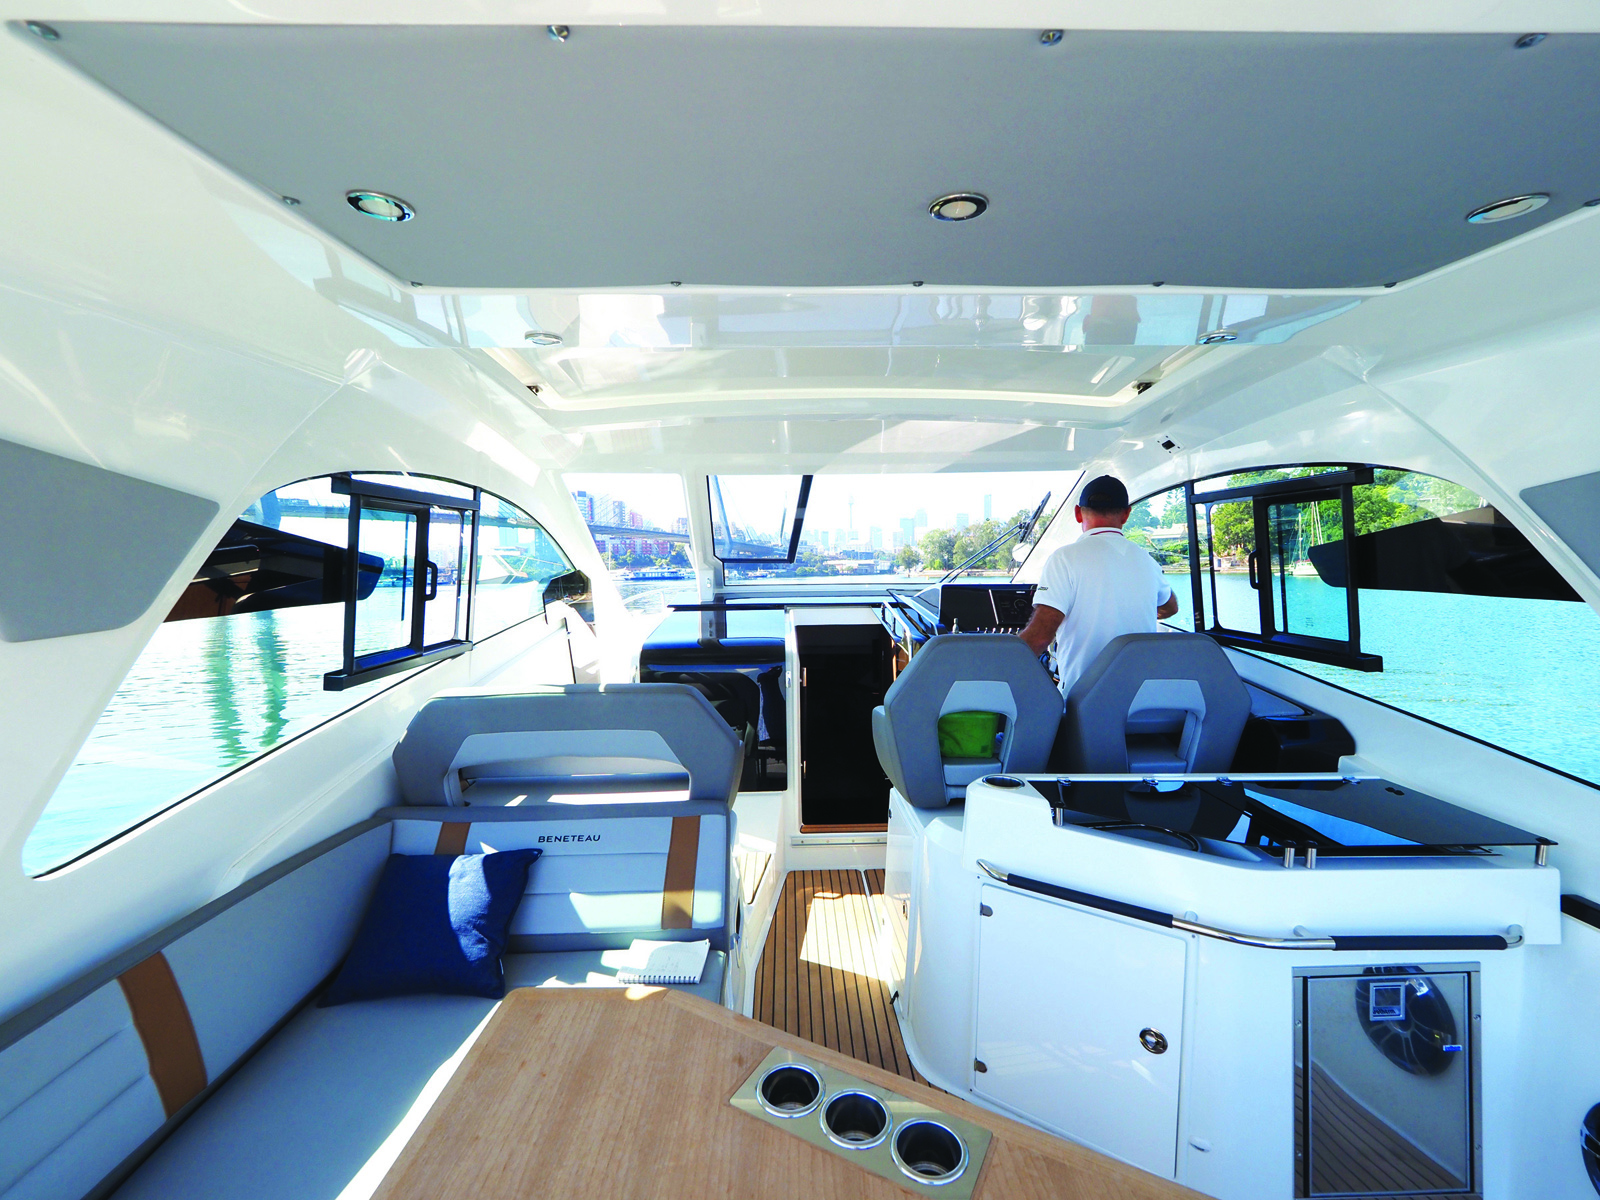 Inside the Beneteau is furbished in whites, greys and wood